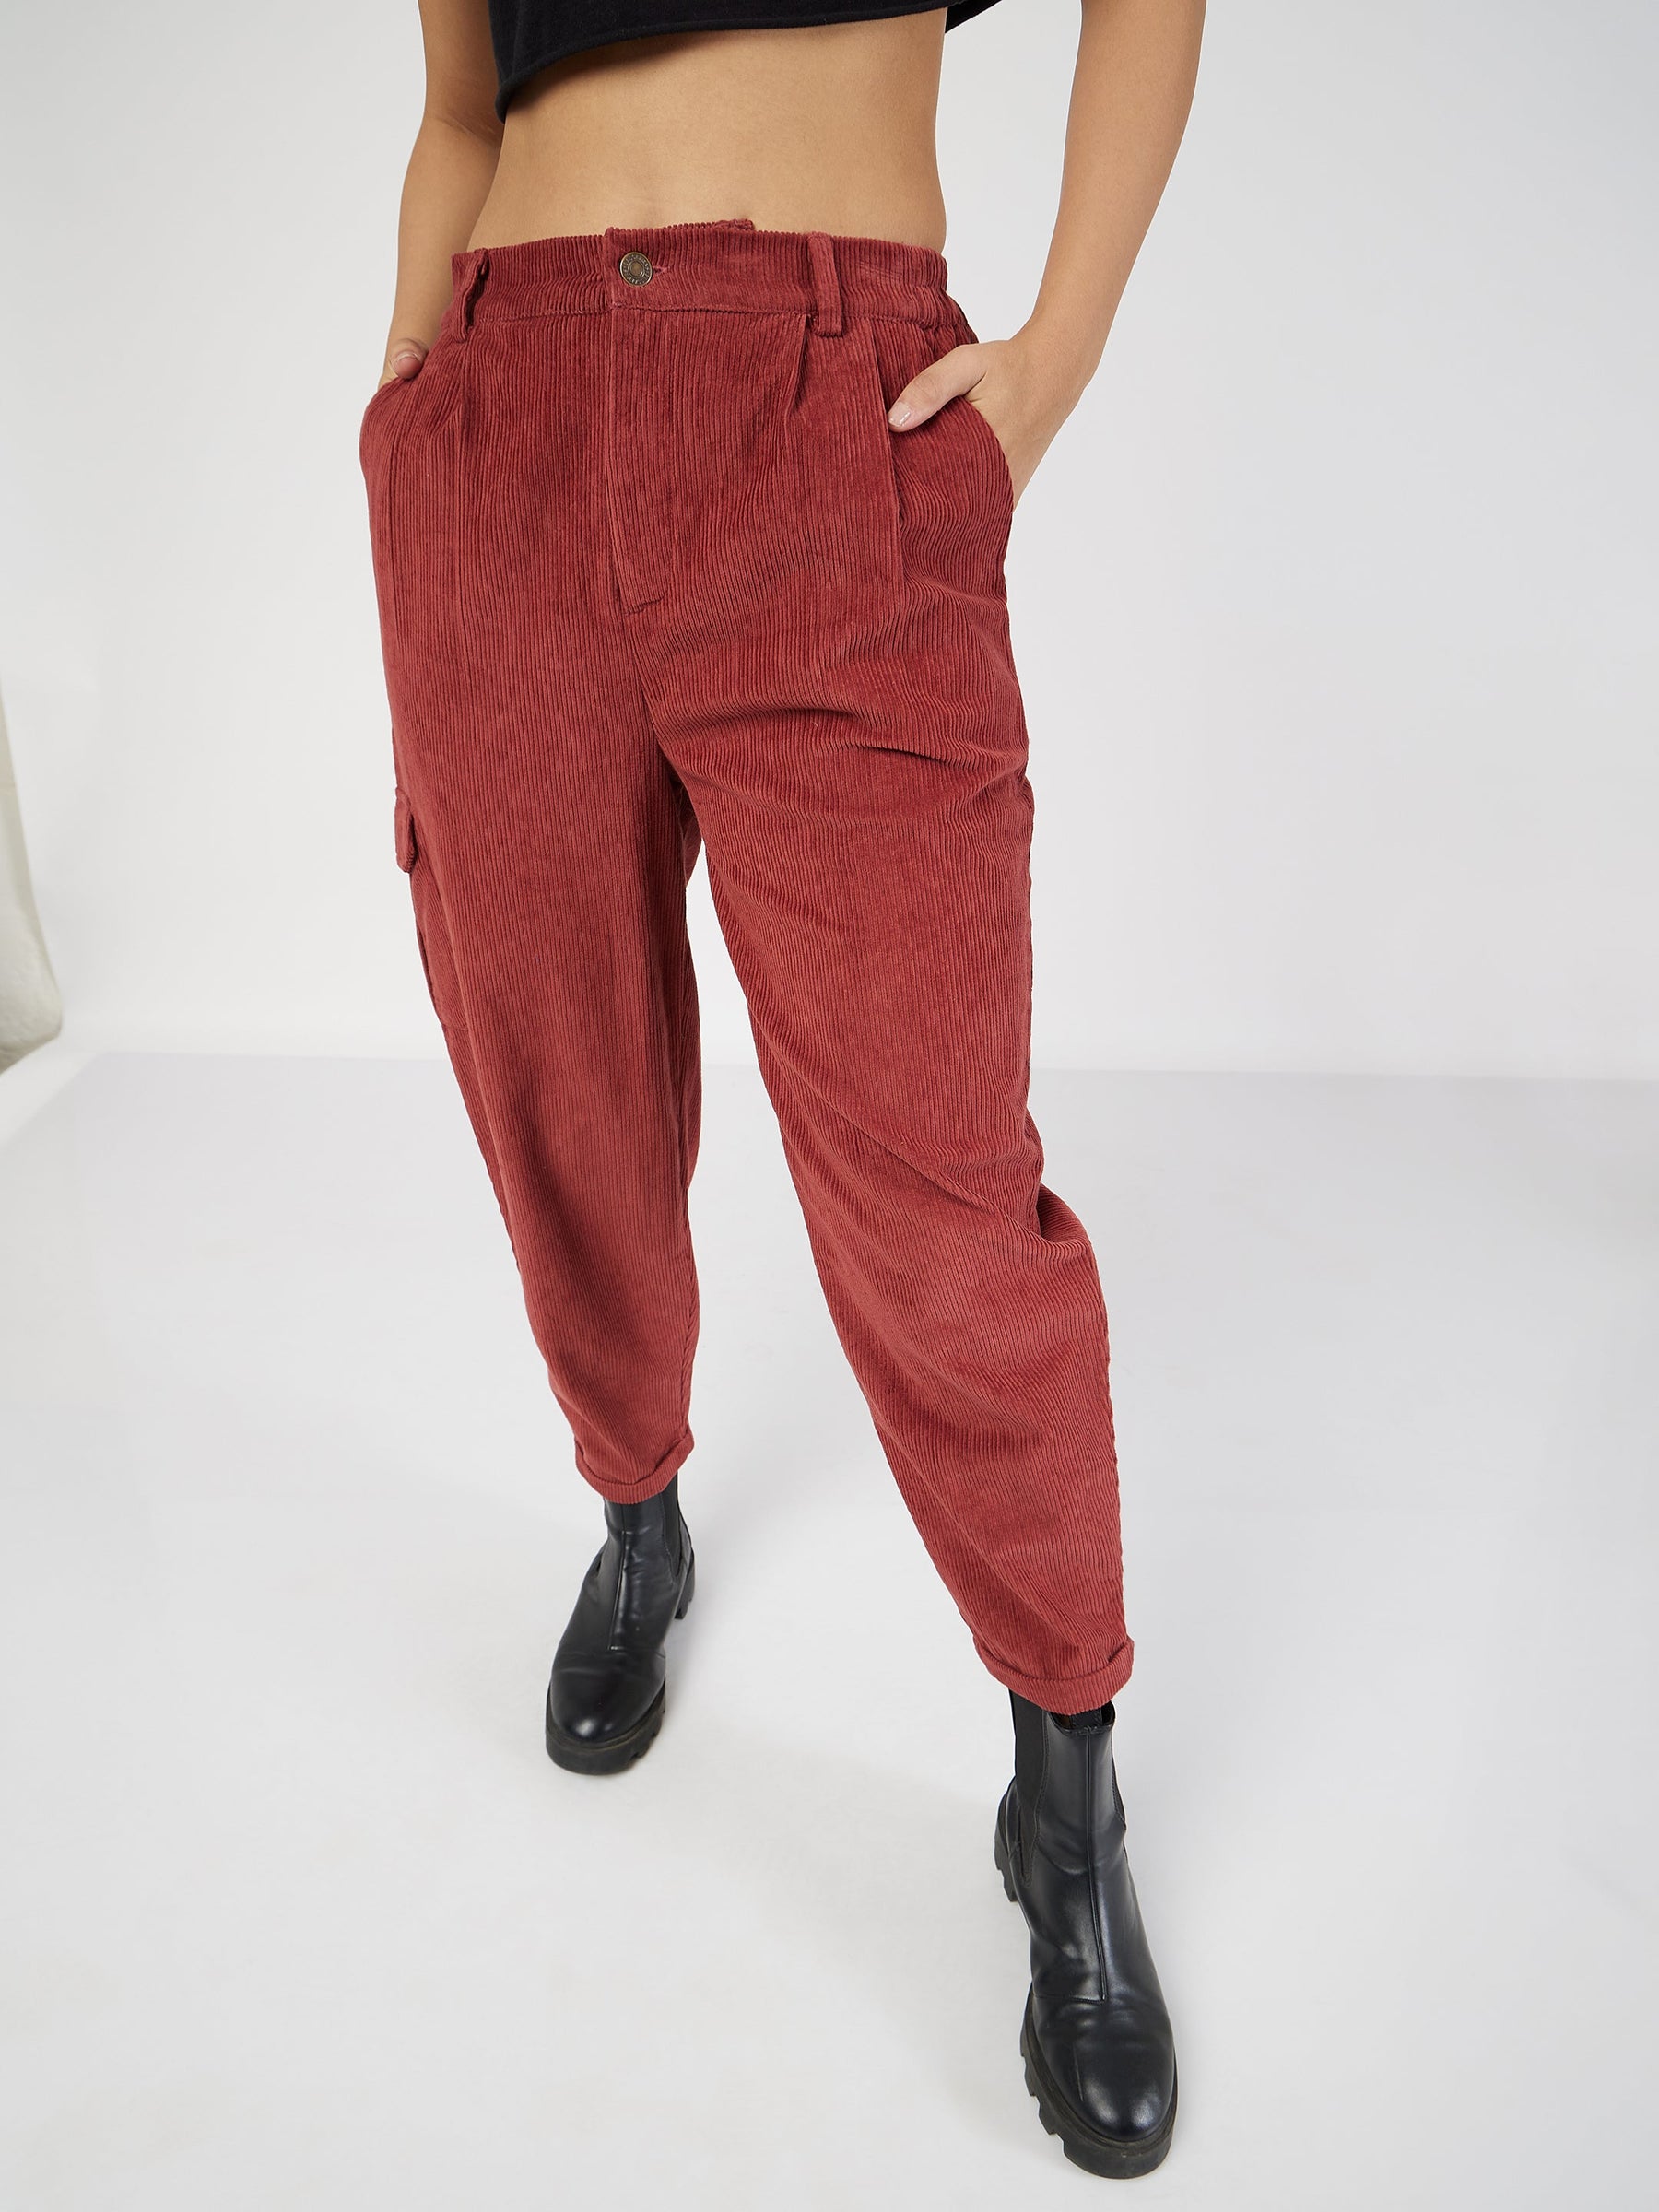 Buy Olive Trousers & Pants for Women by AND Online | Ajio.com